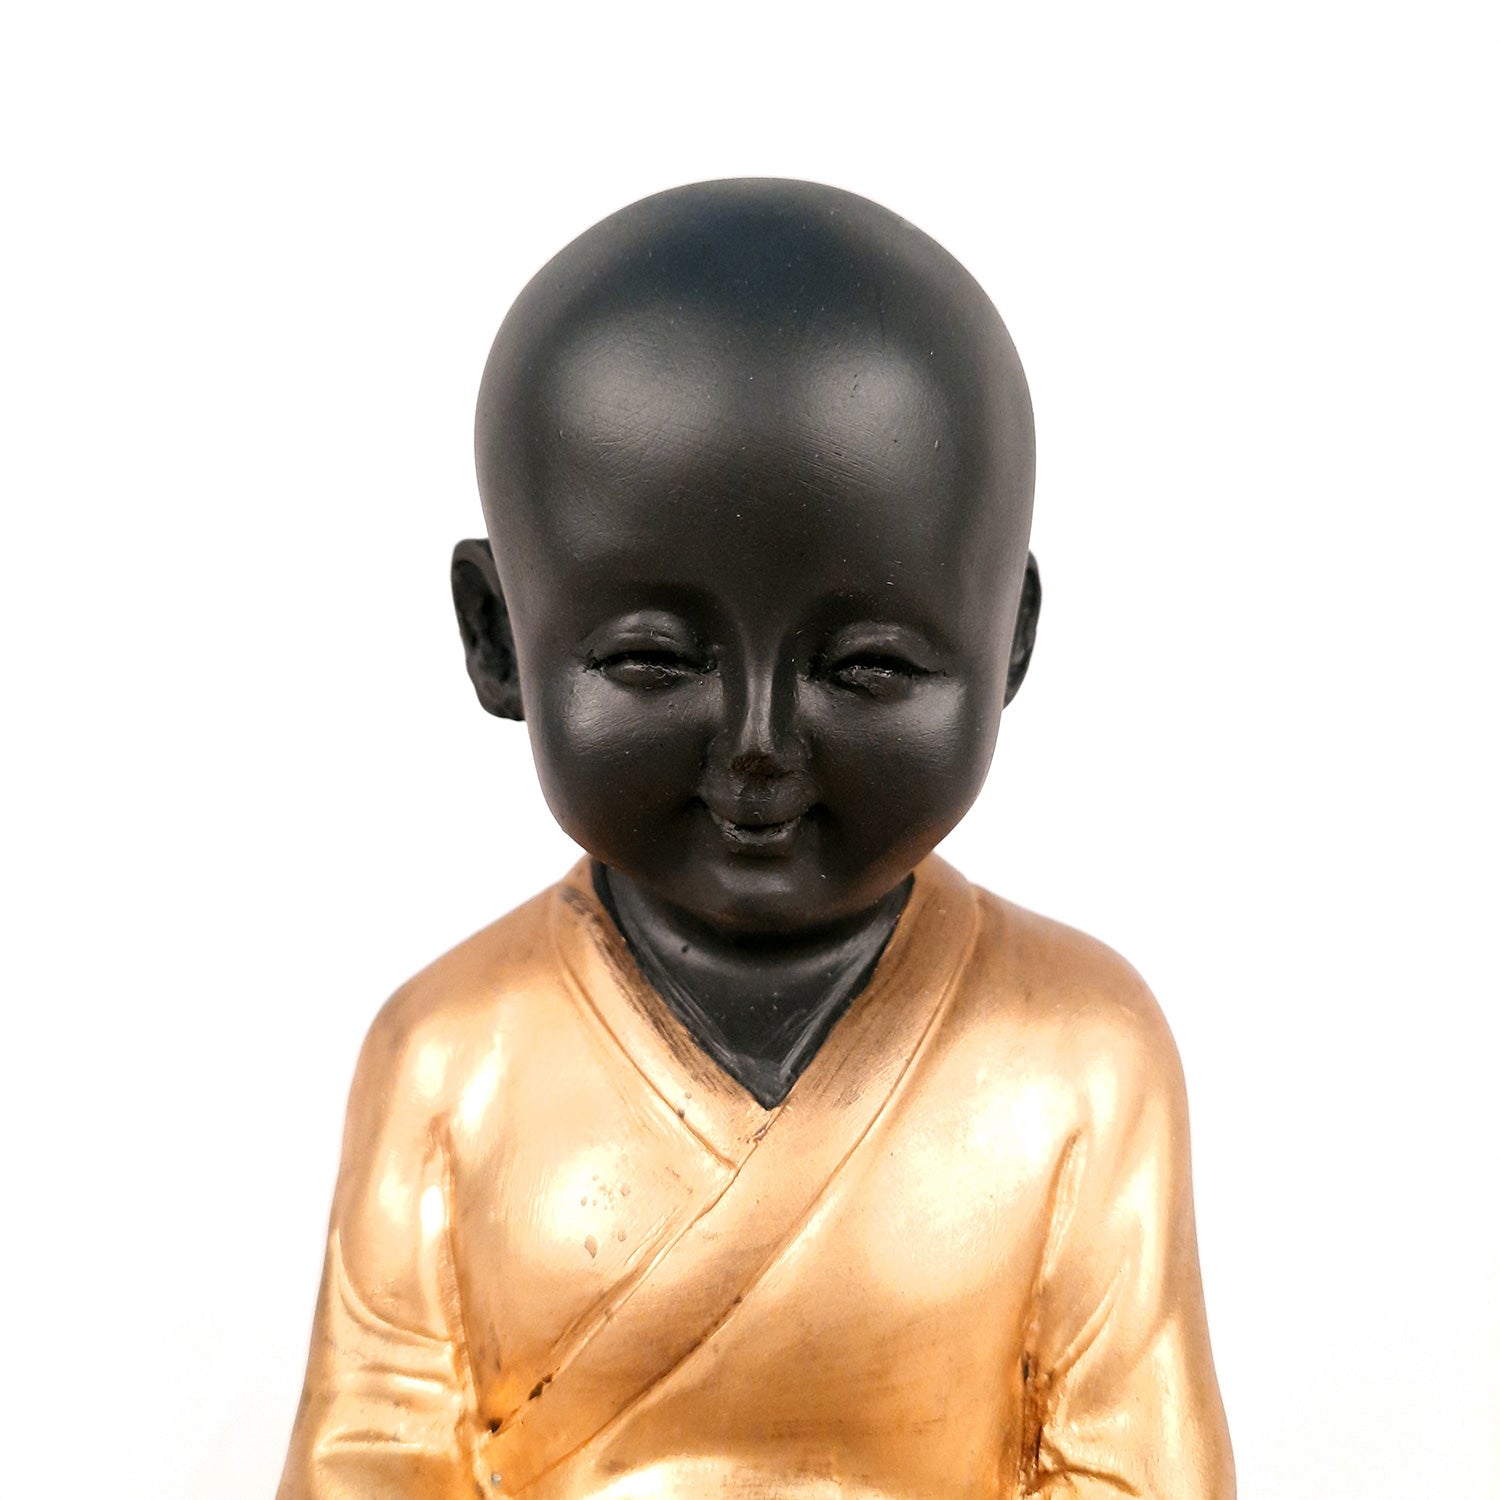 Baby Monk Showpiece with Rustic Look | Feng Shui Decor - For Good Luck, Home, Table, Office Decor & Gift - 7 Inch - apkamart